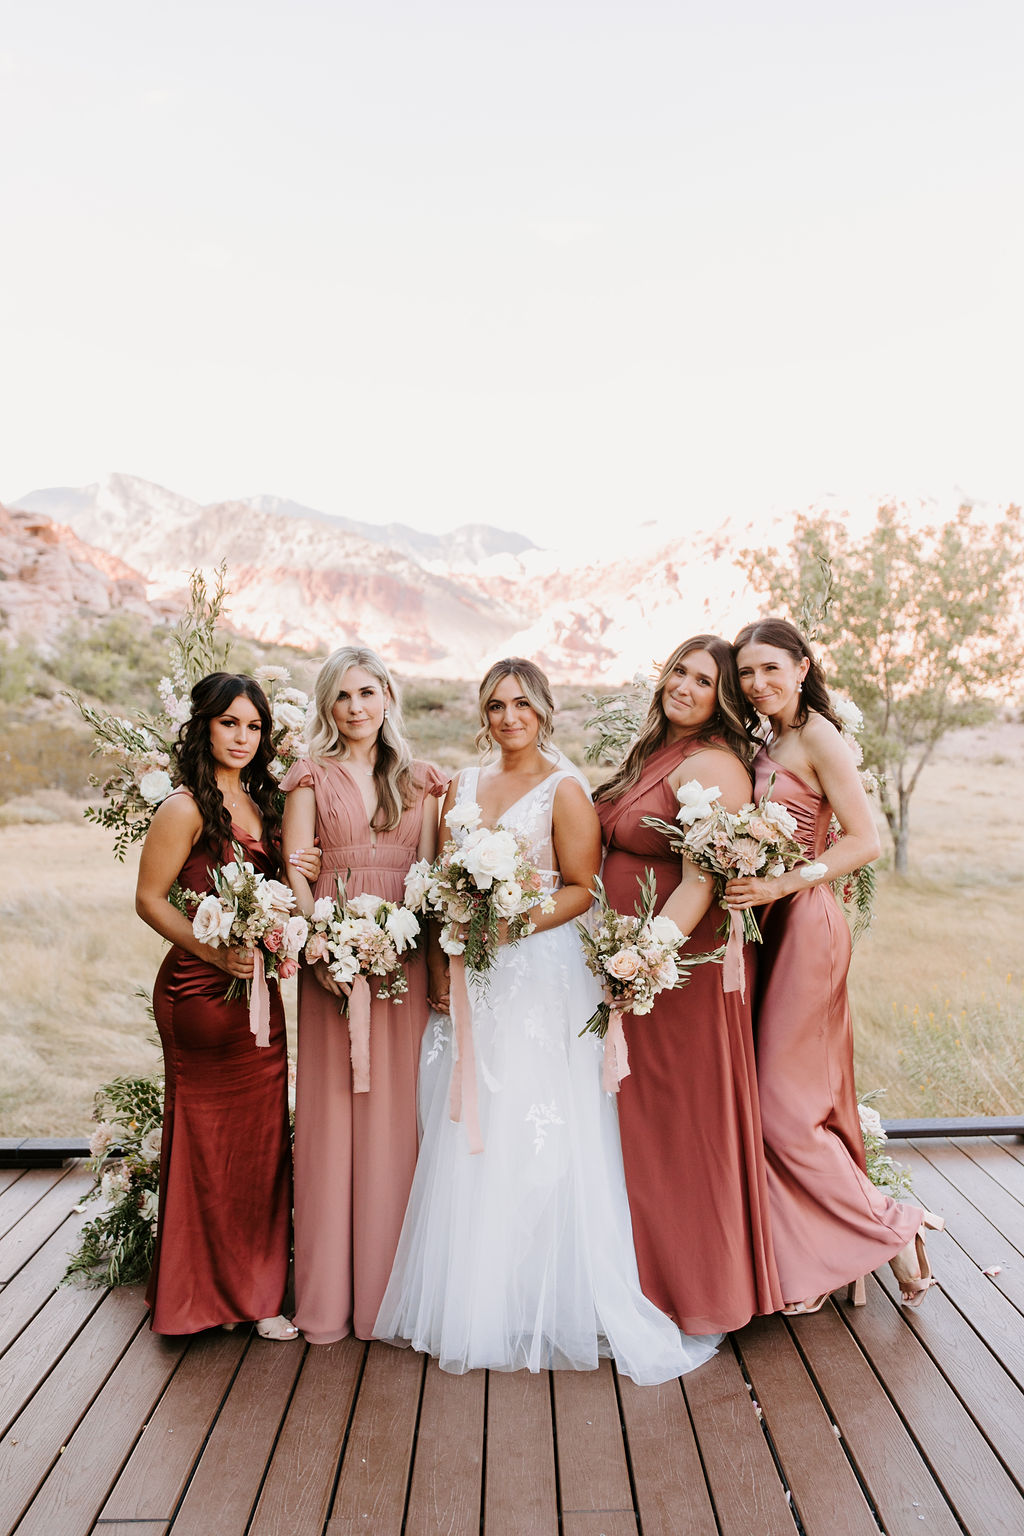 Bride with Bridal Party in Red Rock Canyon in Las Vegas for Romantic Desert & Backyard Micro-Wedding